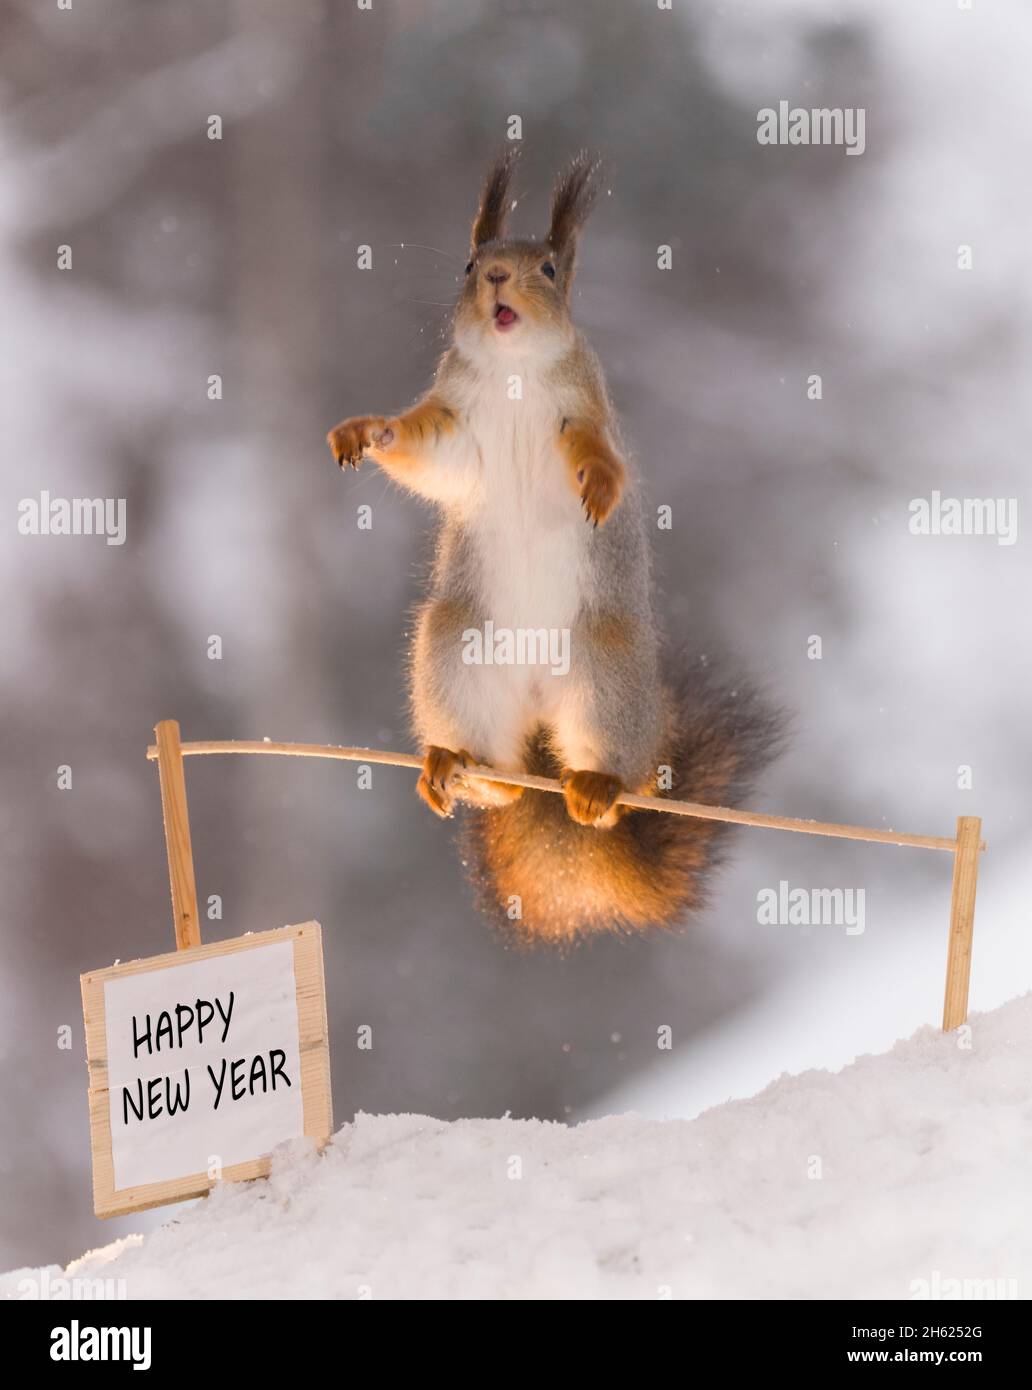 red squirrel with a new year sign and open mouth Stock Photo